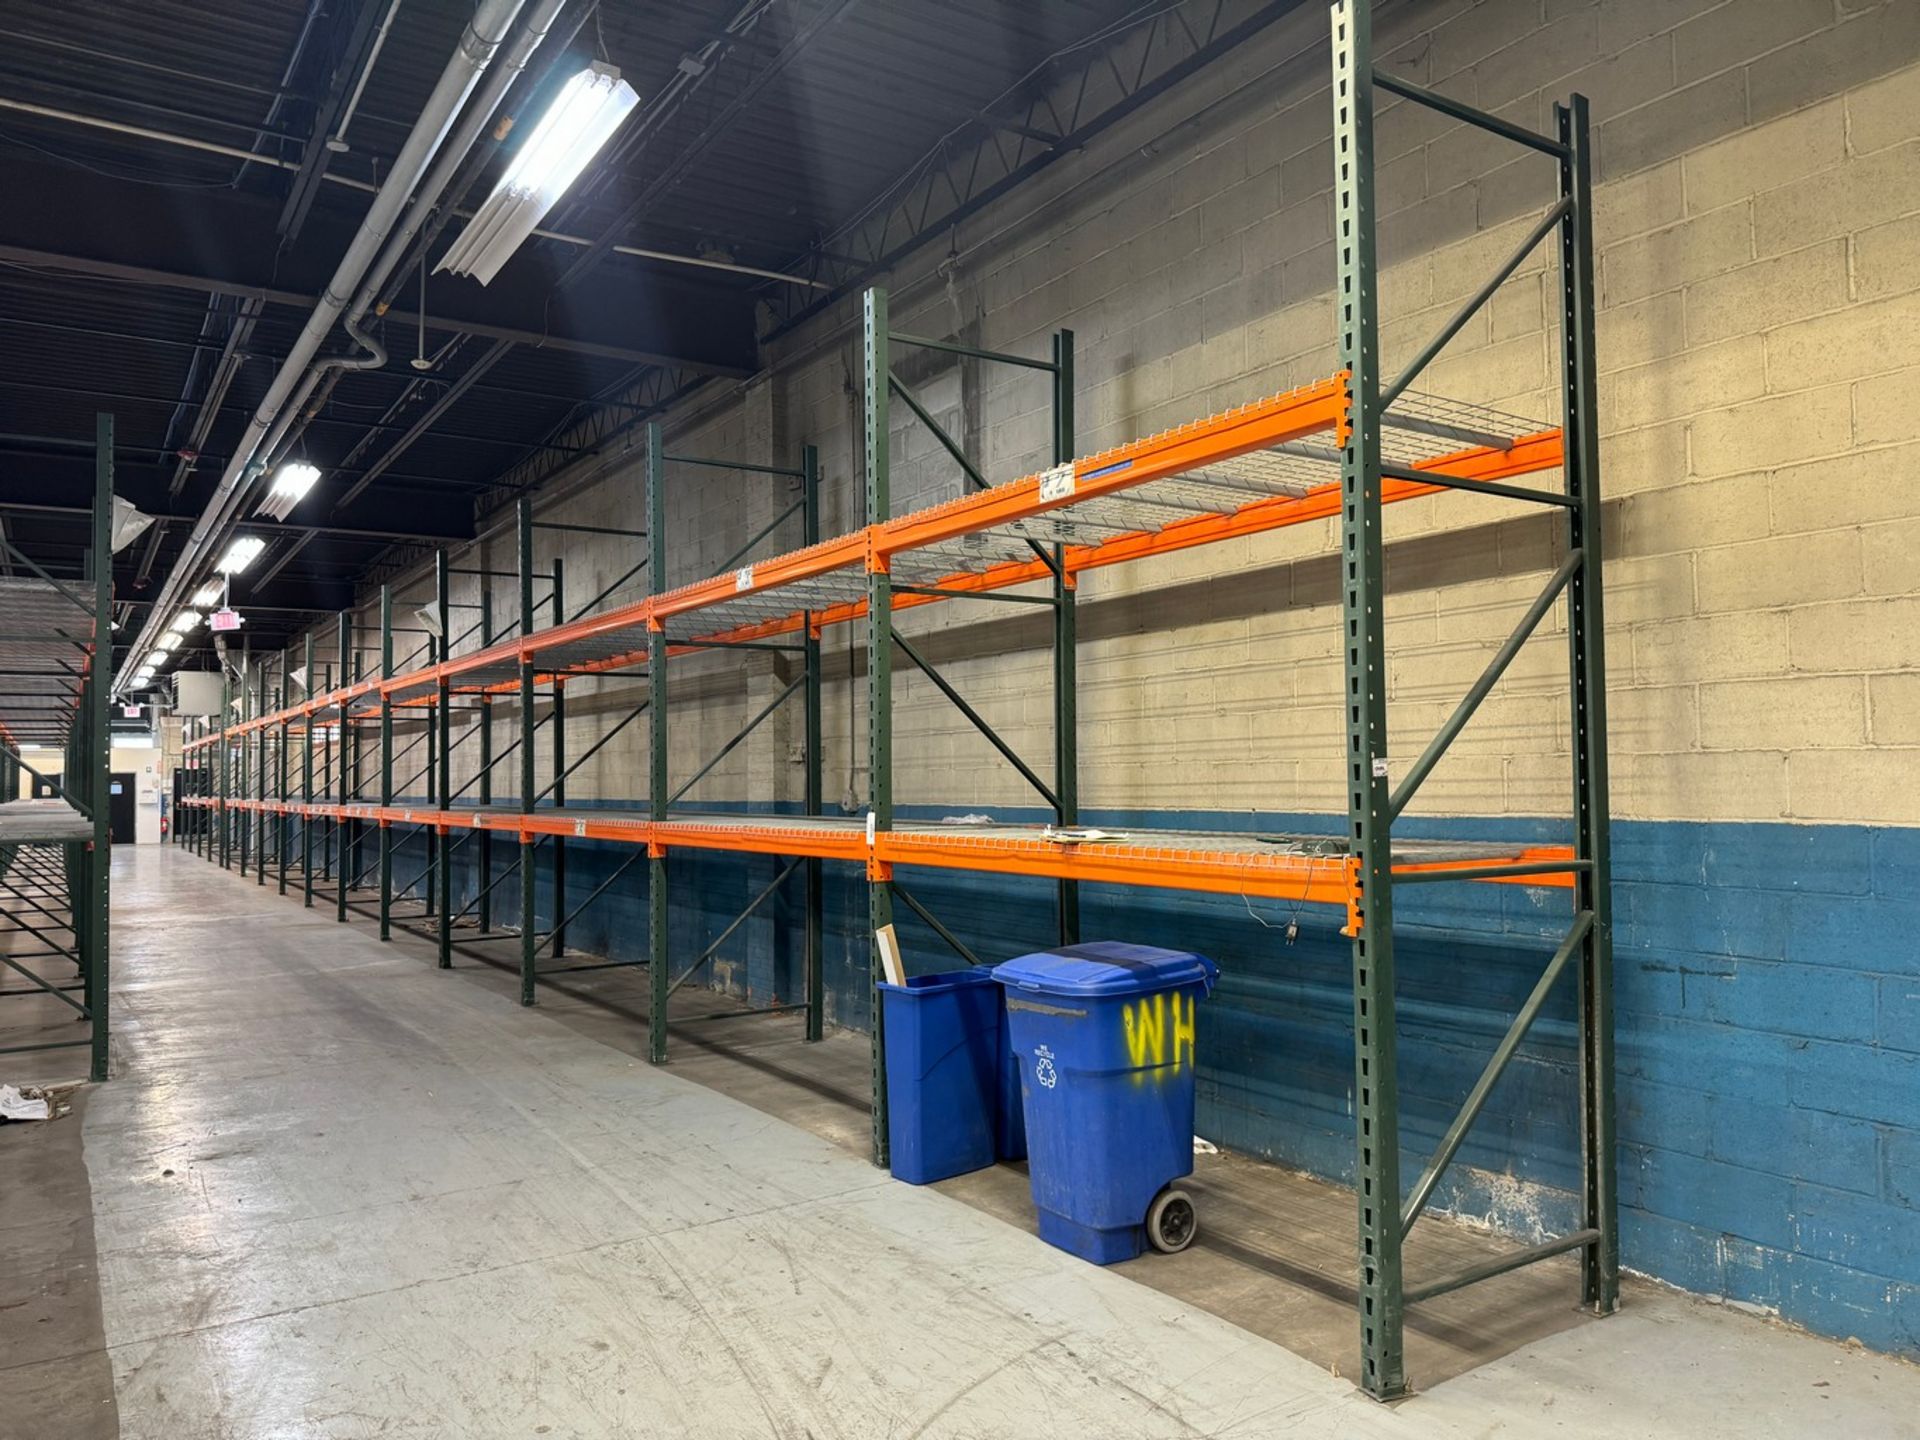 15-Sections Heavy Duty Pallet Racking, 96"W x 44"D x 144"H, 3000 LB Weight Capacity